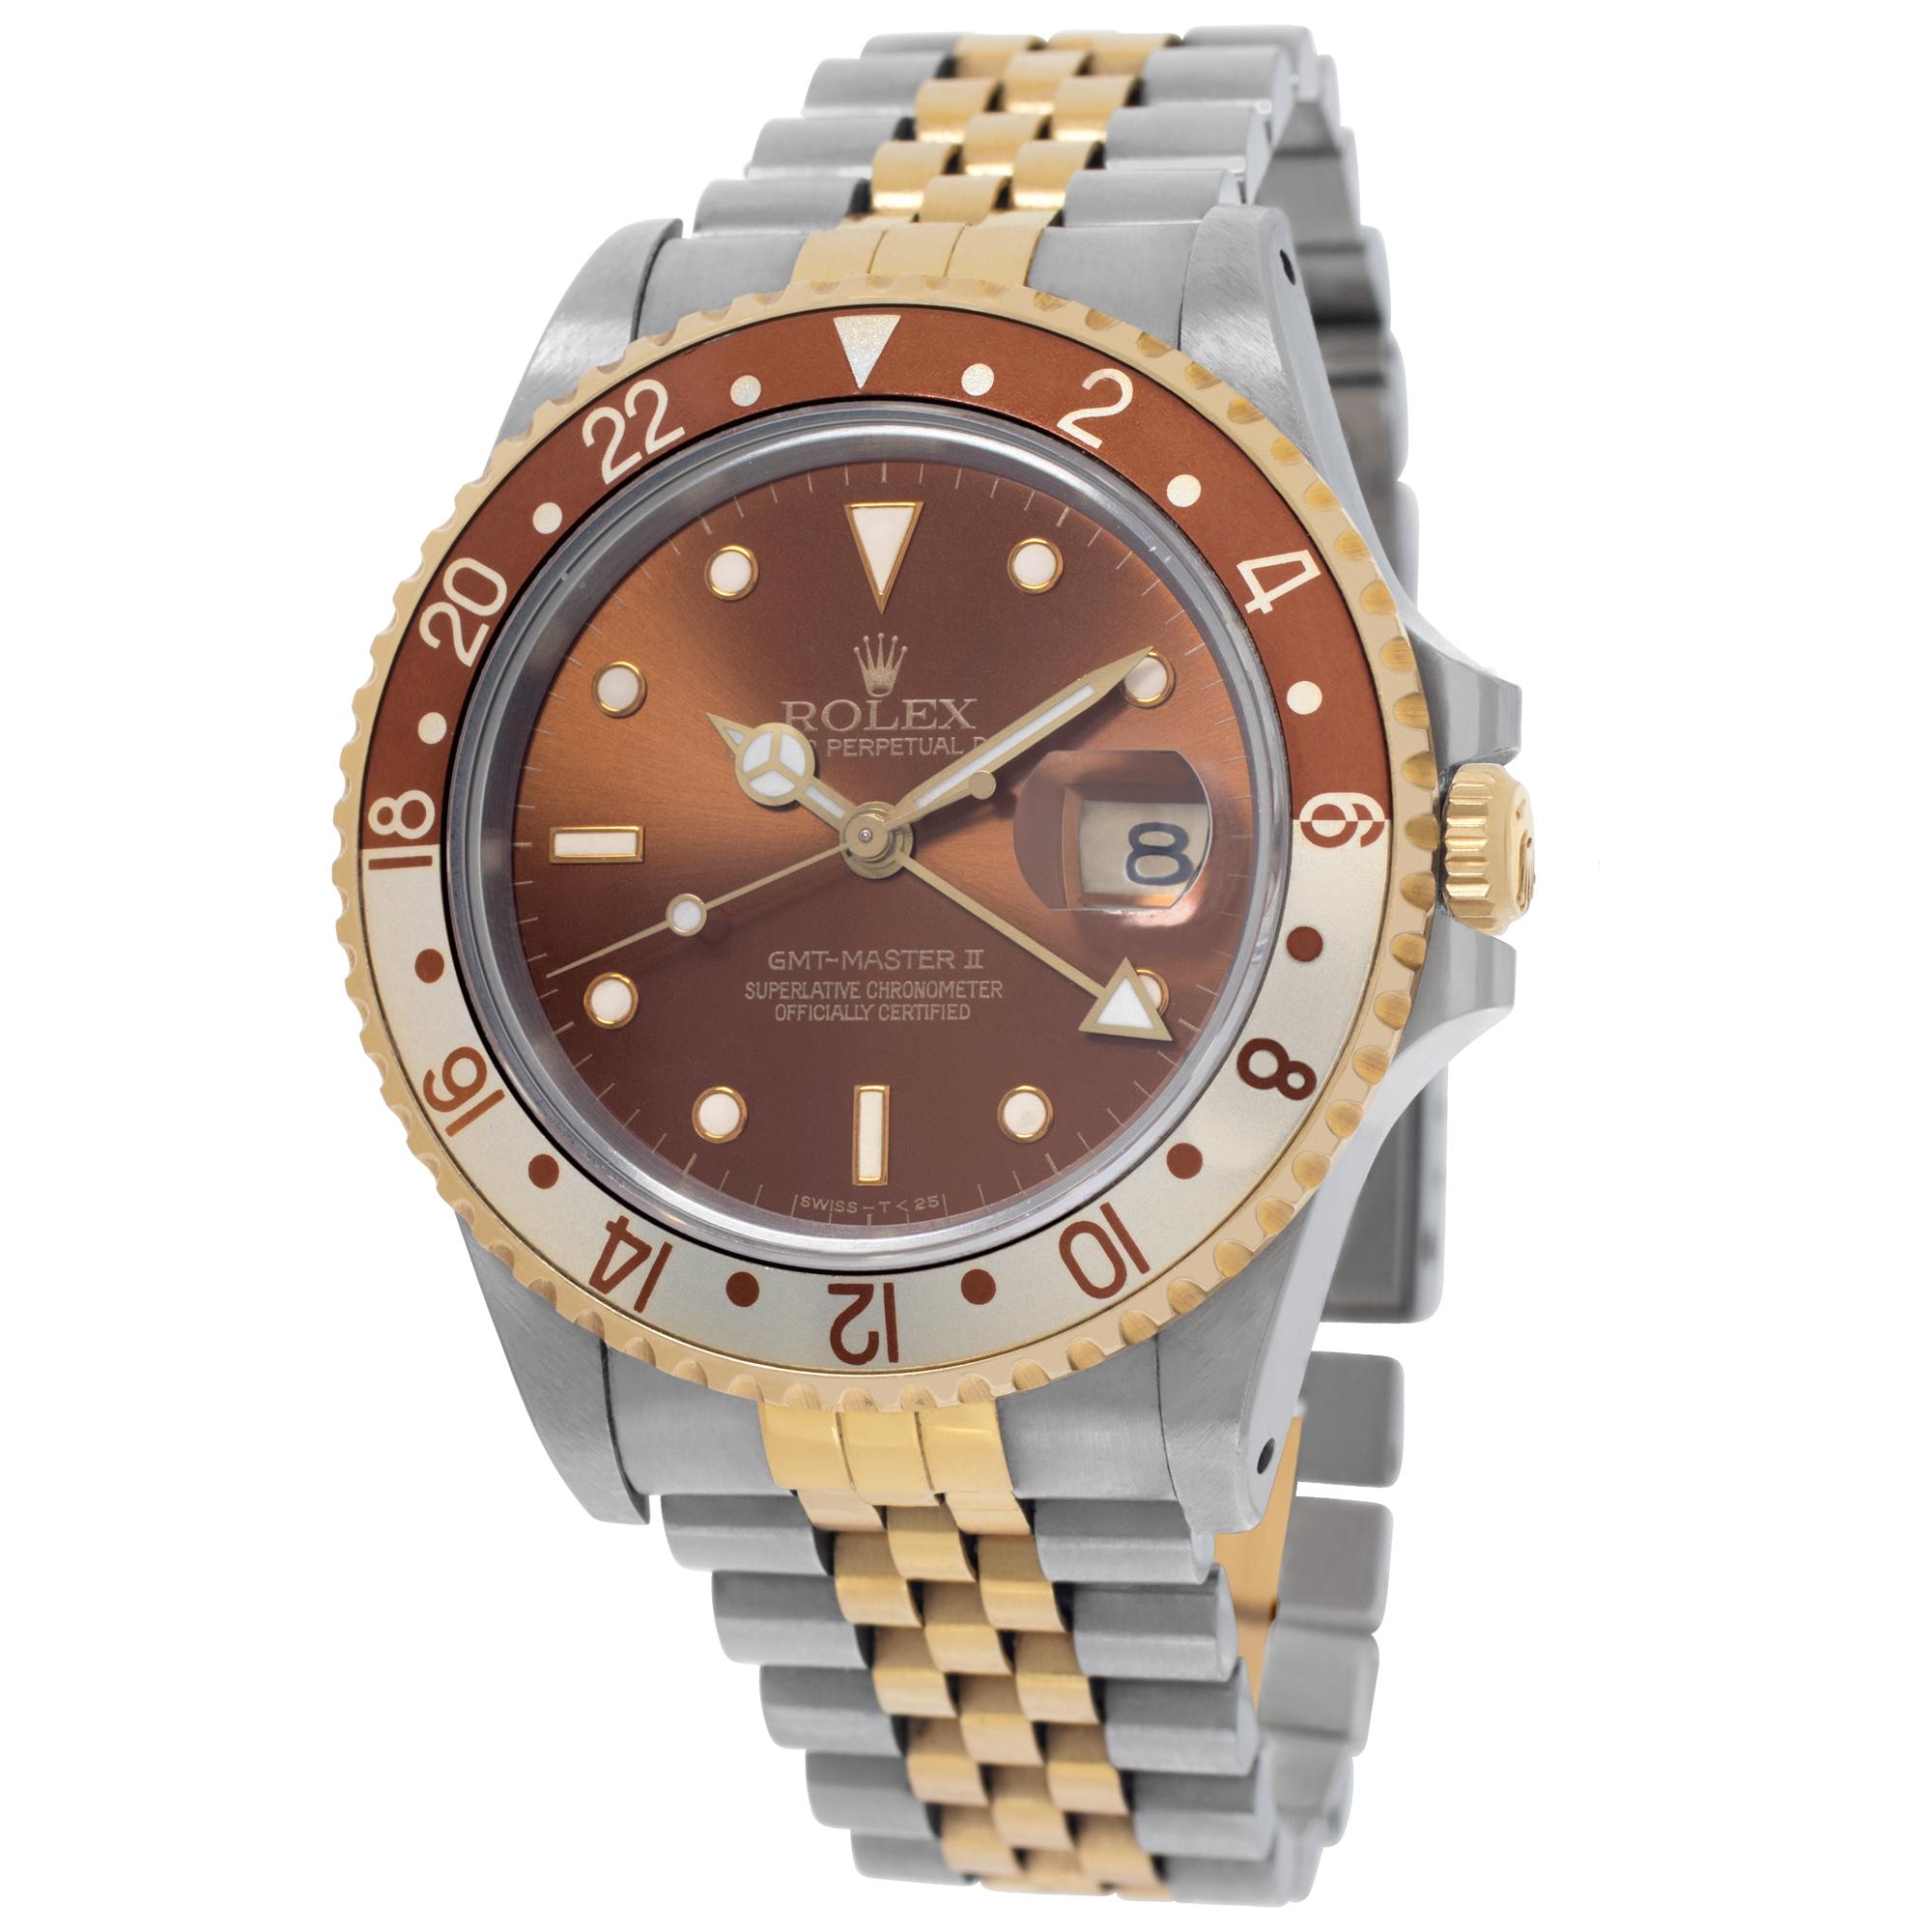 Rolex GMT-Master II Root Beer in 18k & stainless steel. Auto w/ sweep seconds, dual time and date. 40 mm case size. With box and booklets. Ref 16713. Circa 1989. **Bank wire only at this price** Fine Pre-owned Rolex Watch.

Certified preowned Sport